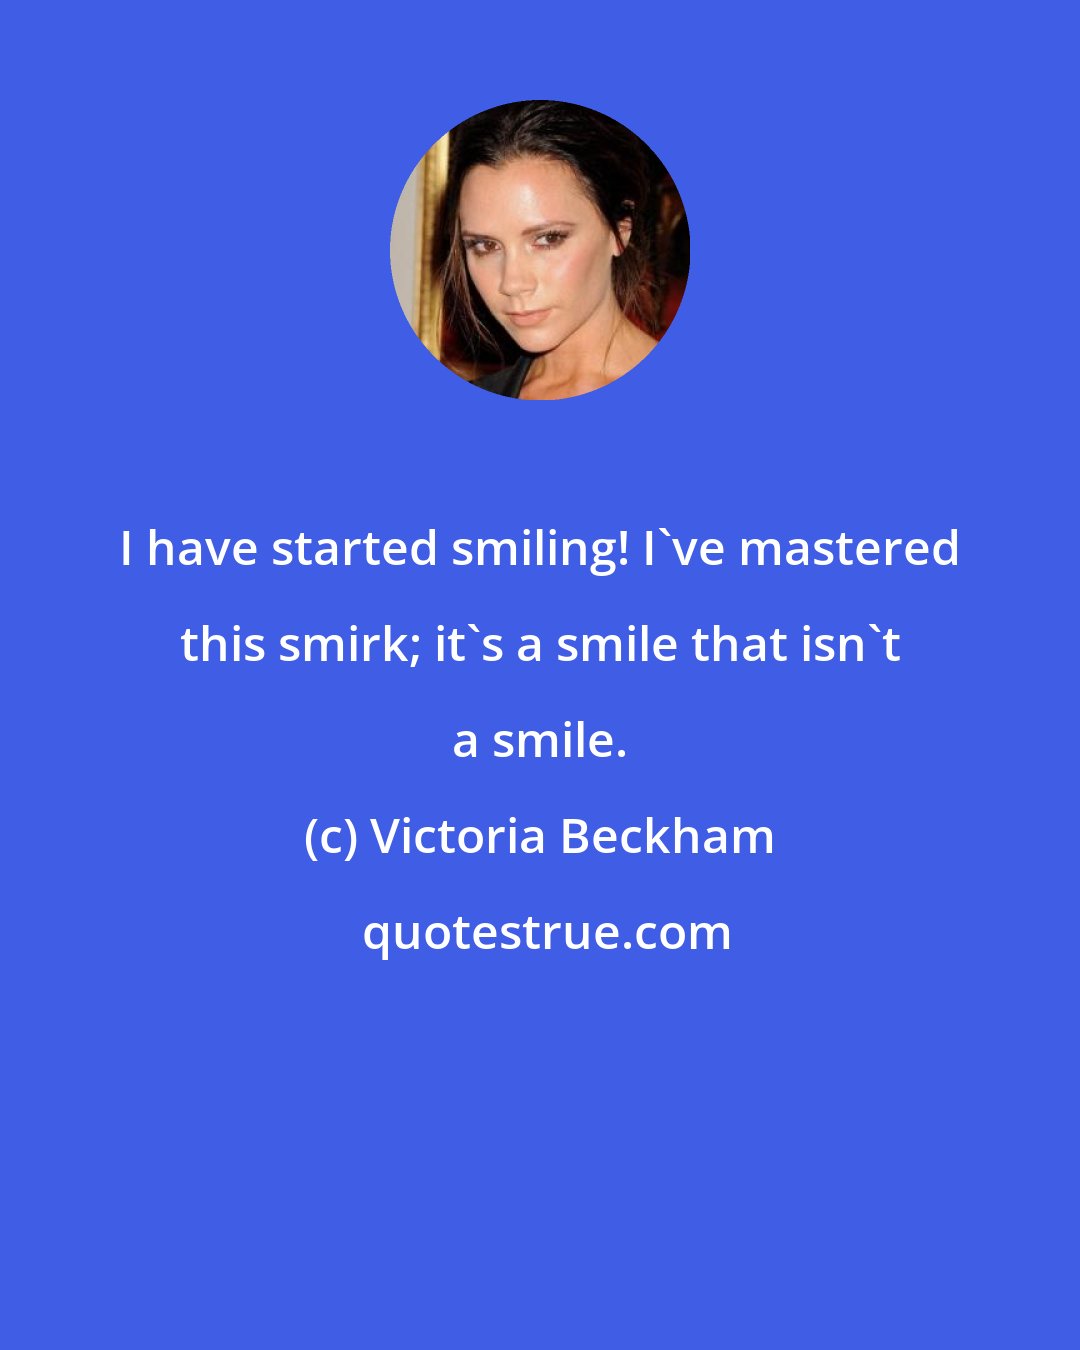 Victoria Beckham: I have started smiling! I've mastered this smirk; it's a smile that isn't a smile.